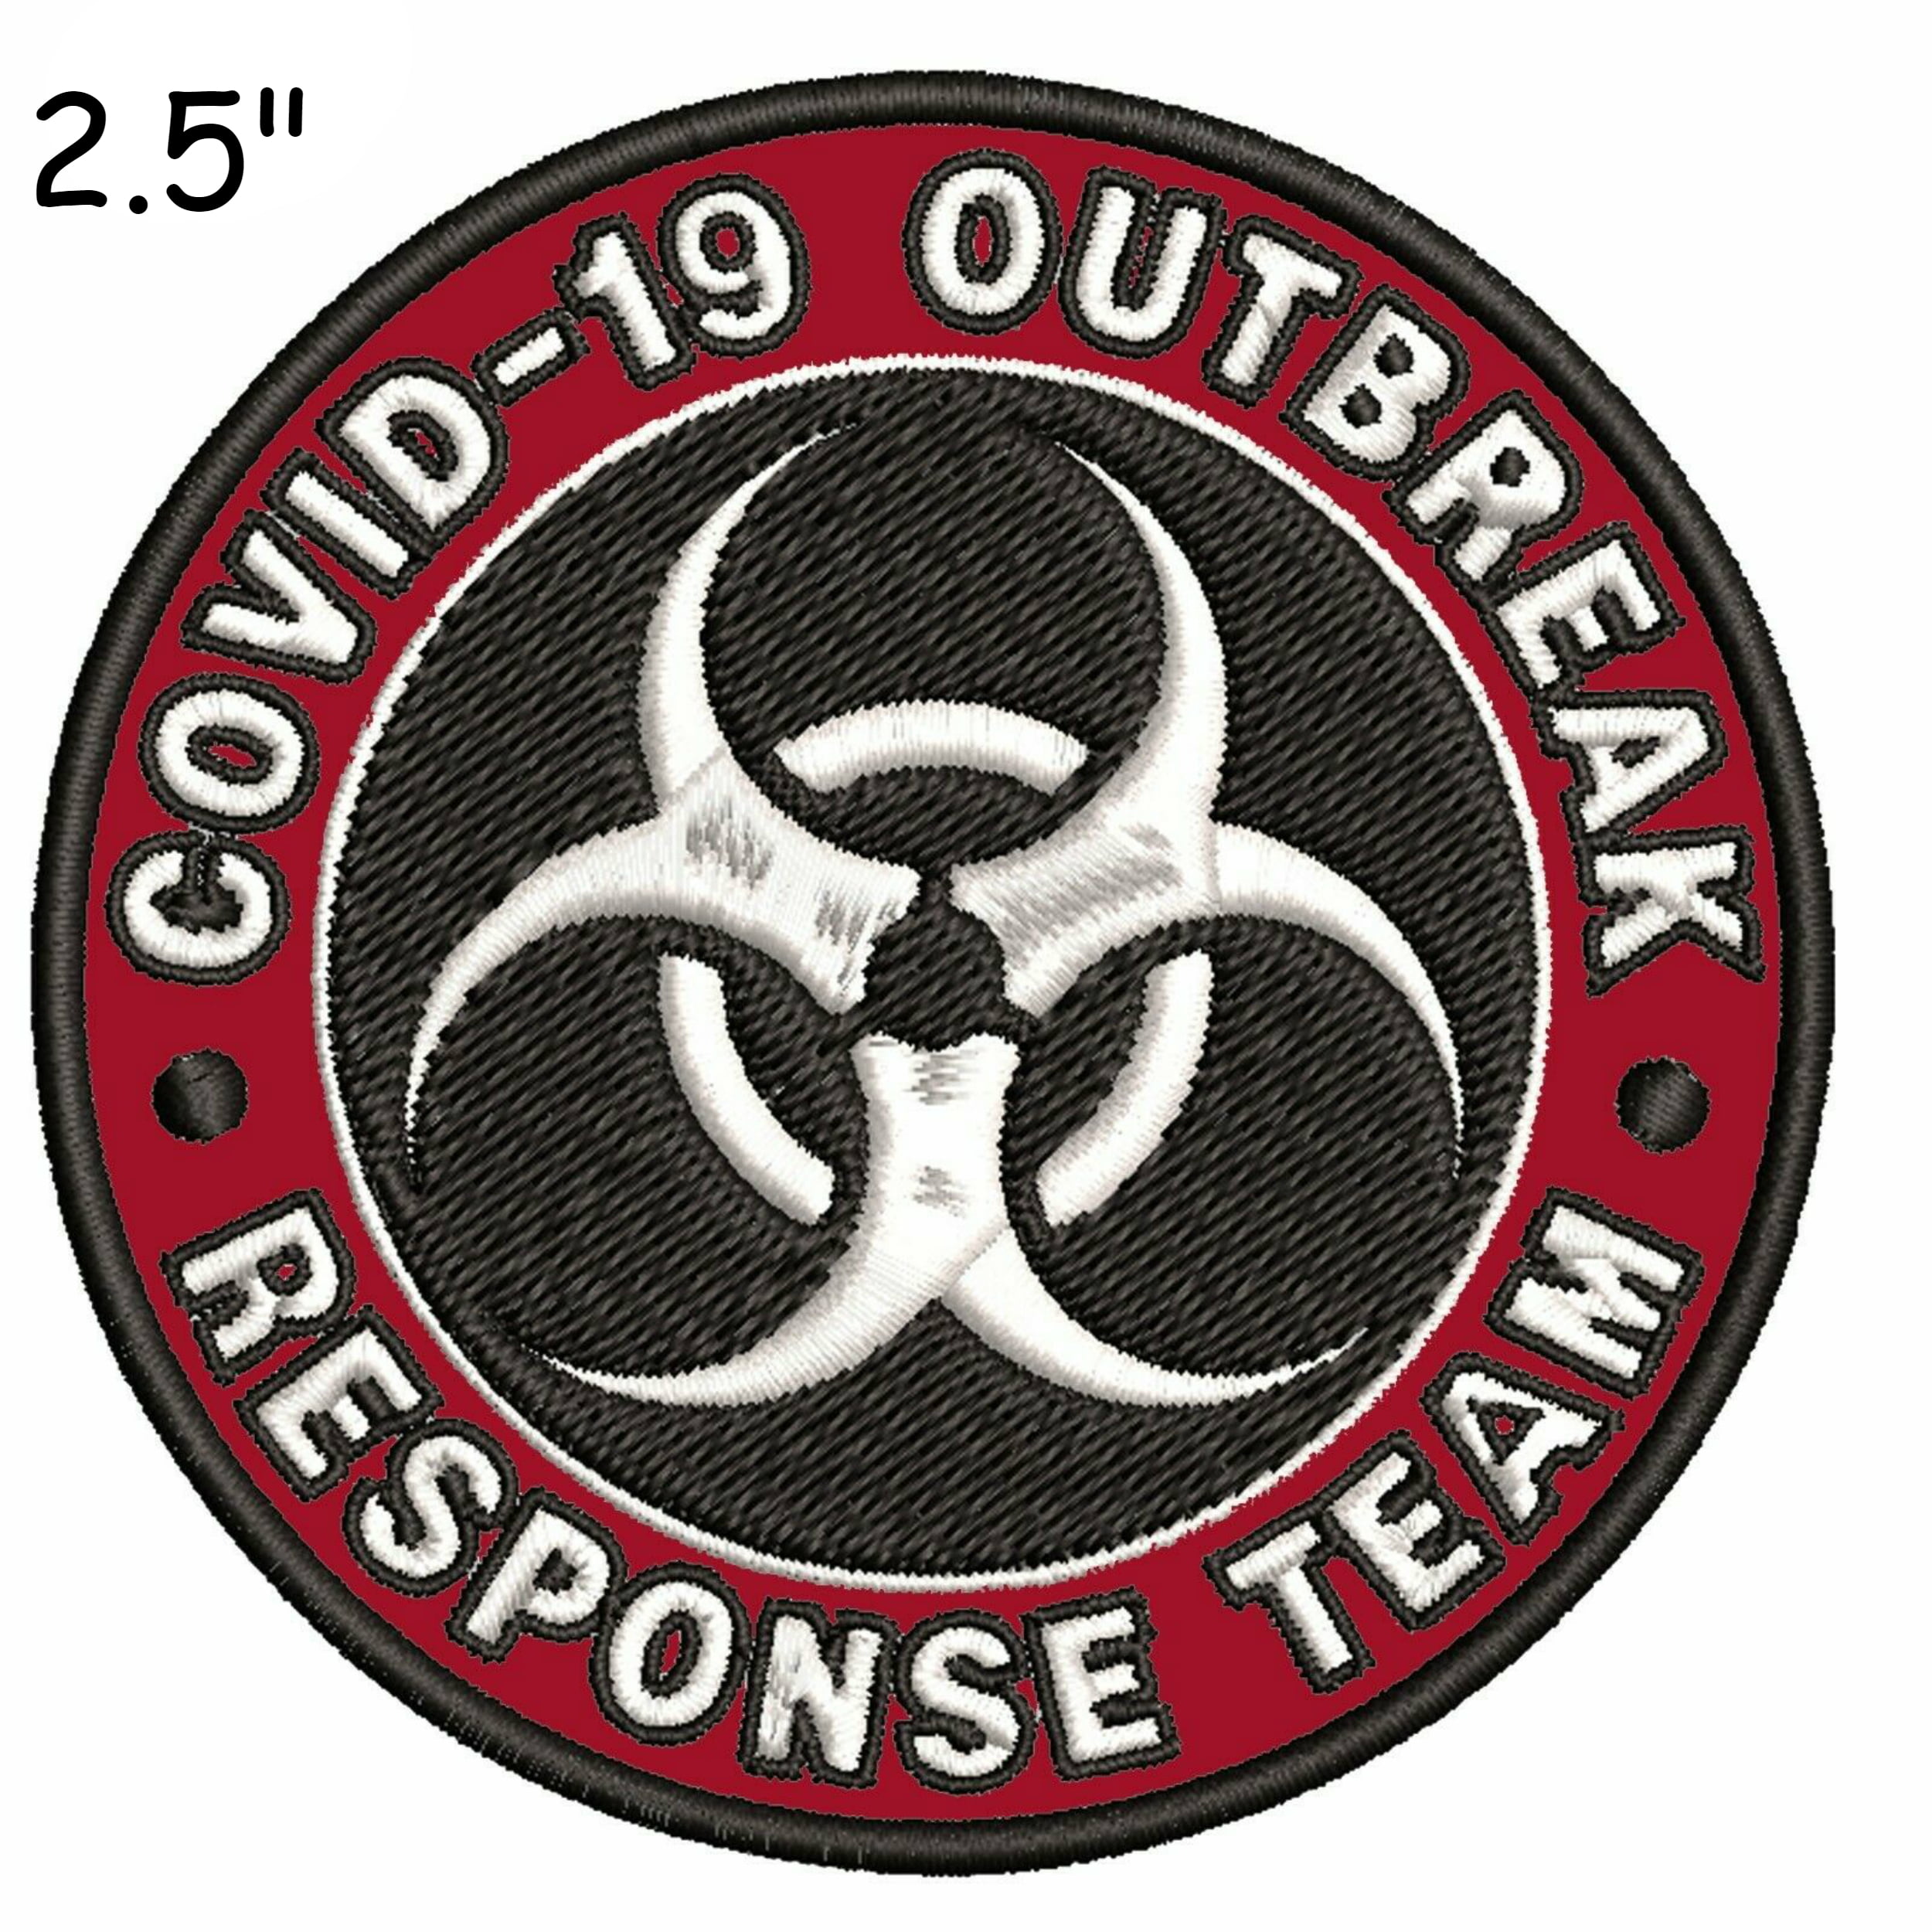 I SURVIVED 2020 BIOHAZARD Response Team Embroidered Patch Hook & Loop Applique 